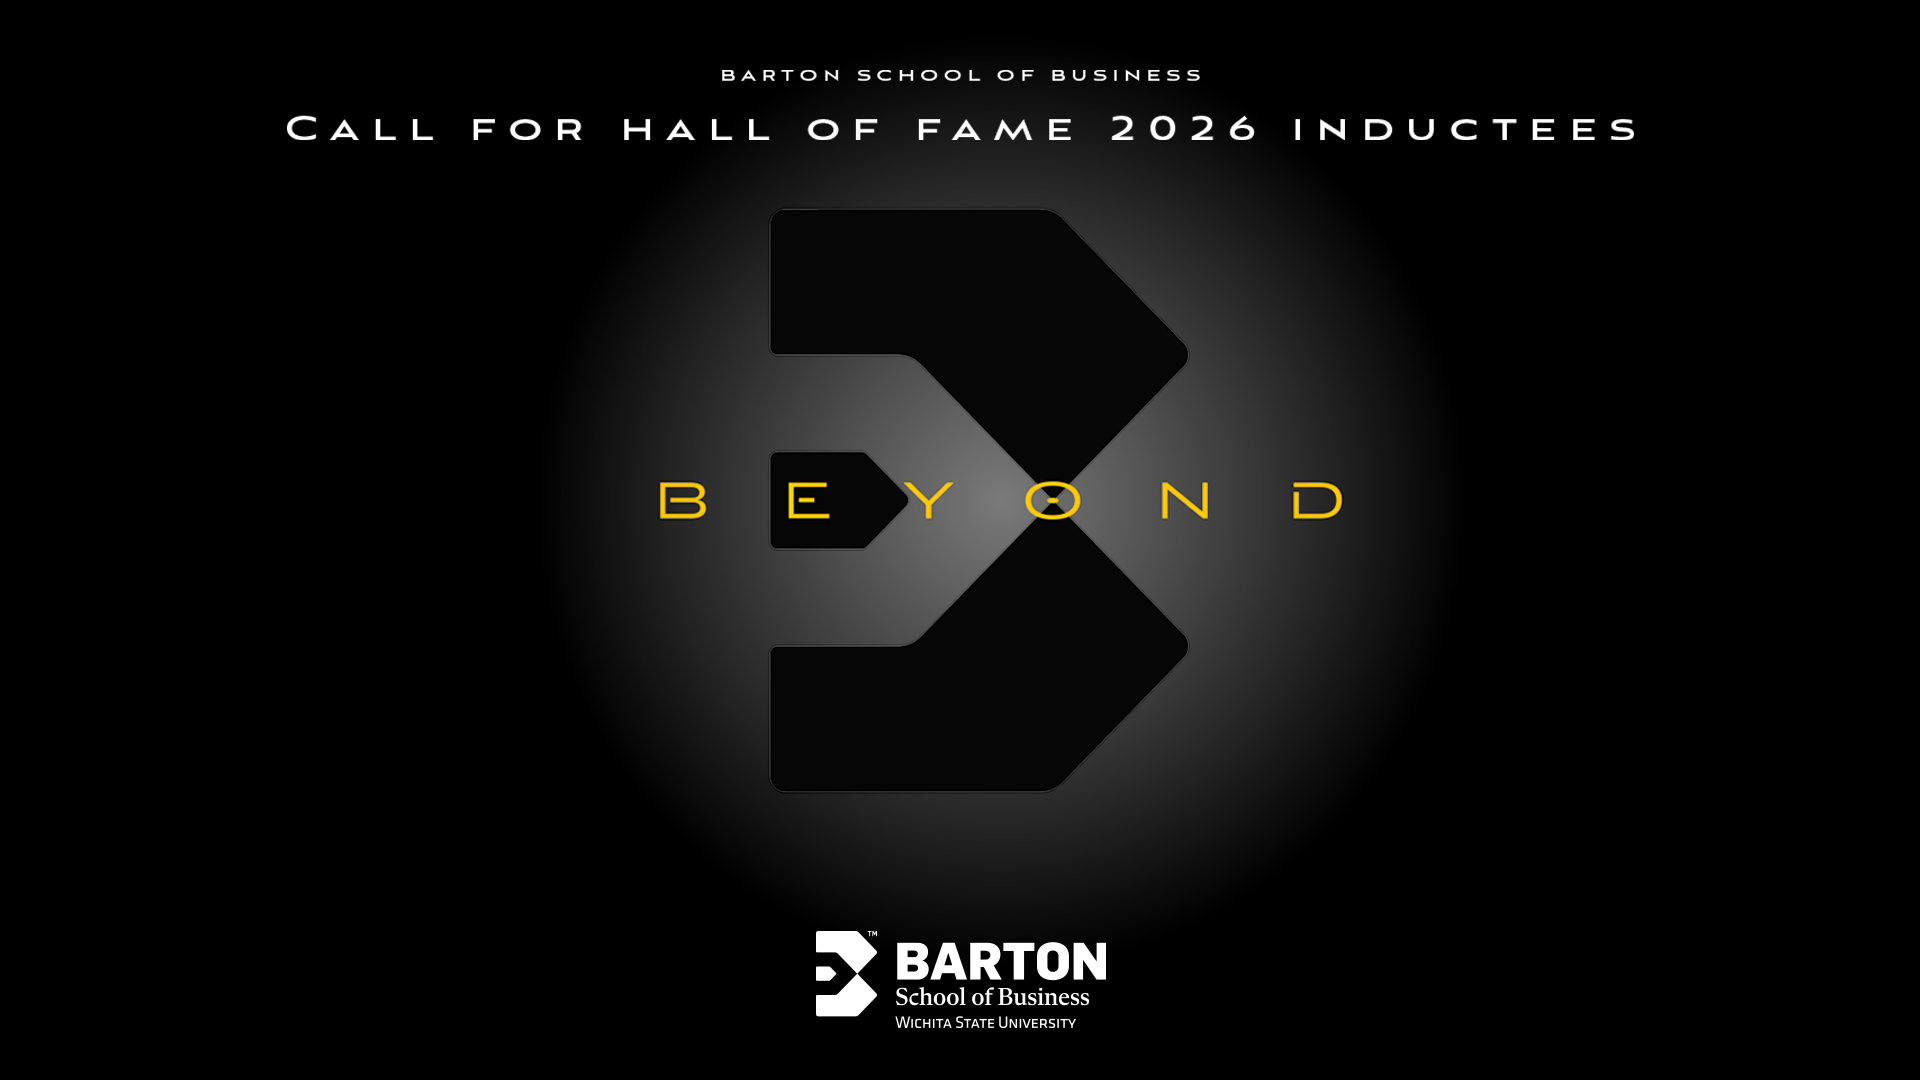 Barton School Accepting Nominations for “Beyond” Hall of Fame 2026 Inductees